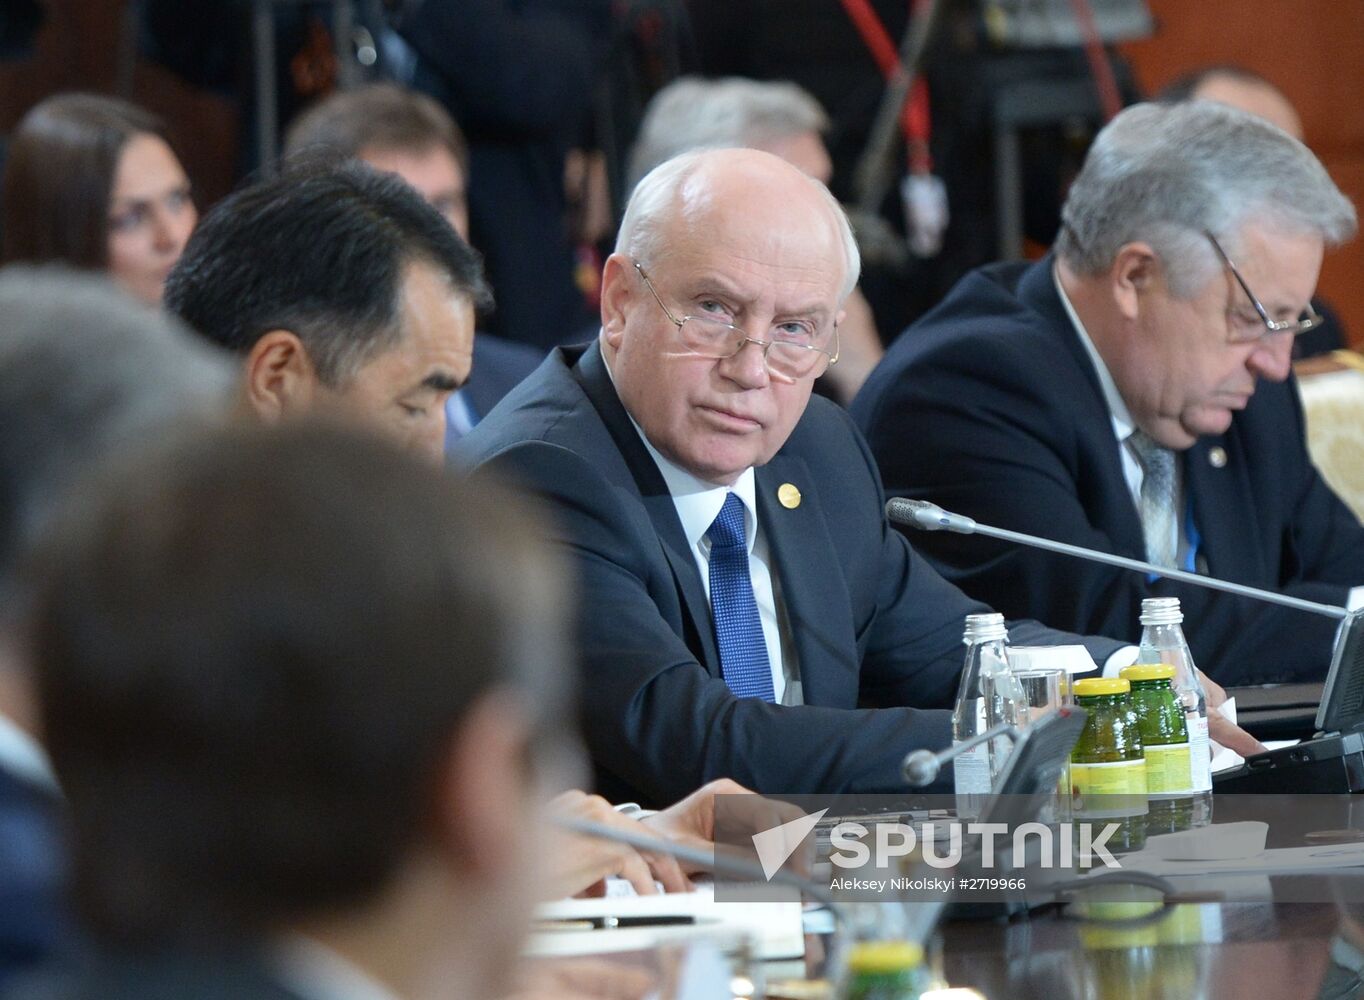 Meeting of the CIS Council of Heads of State